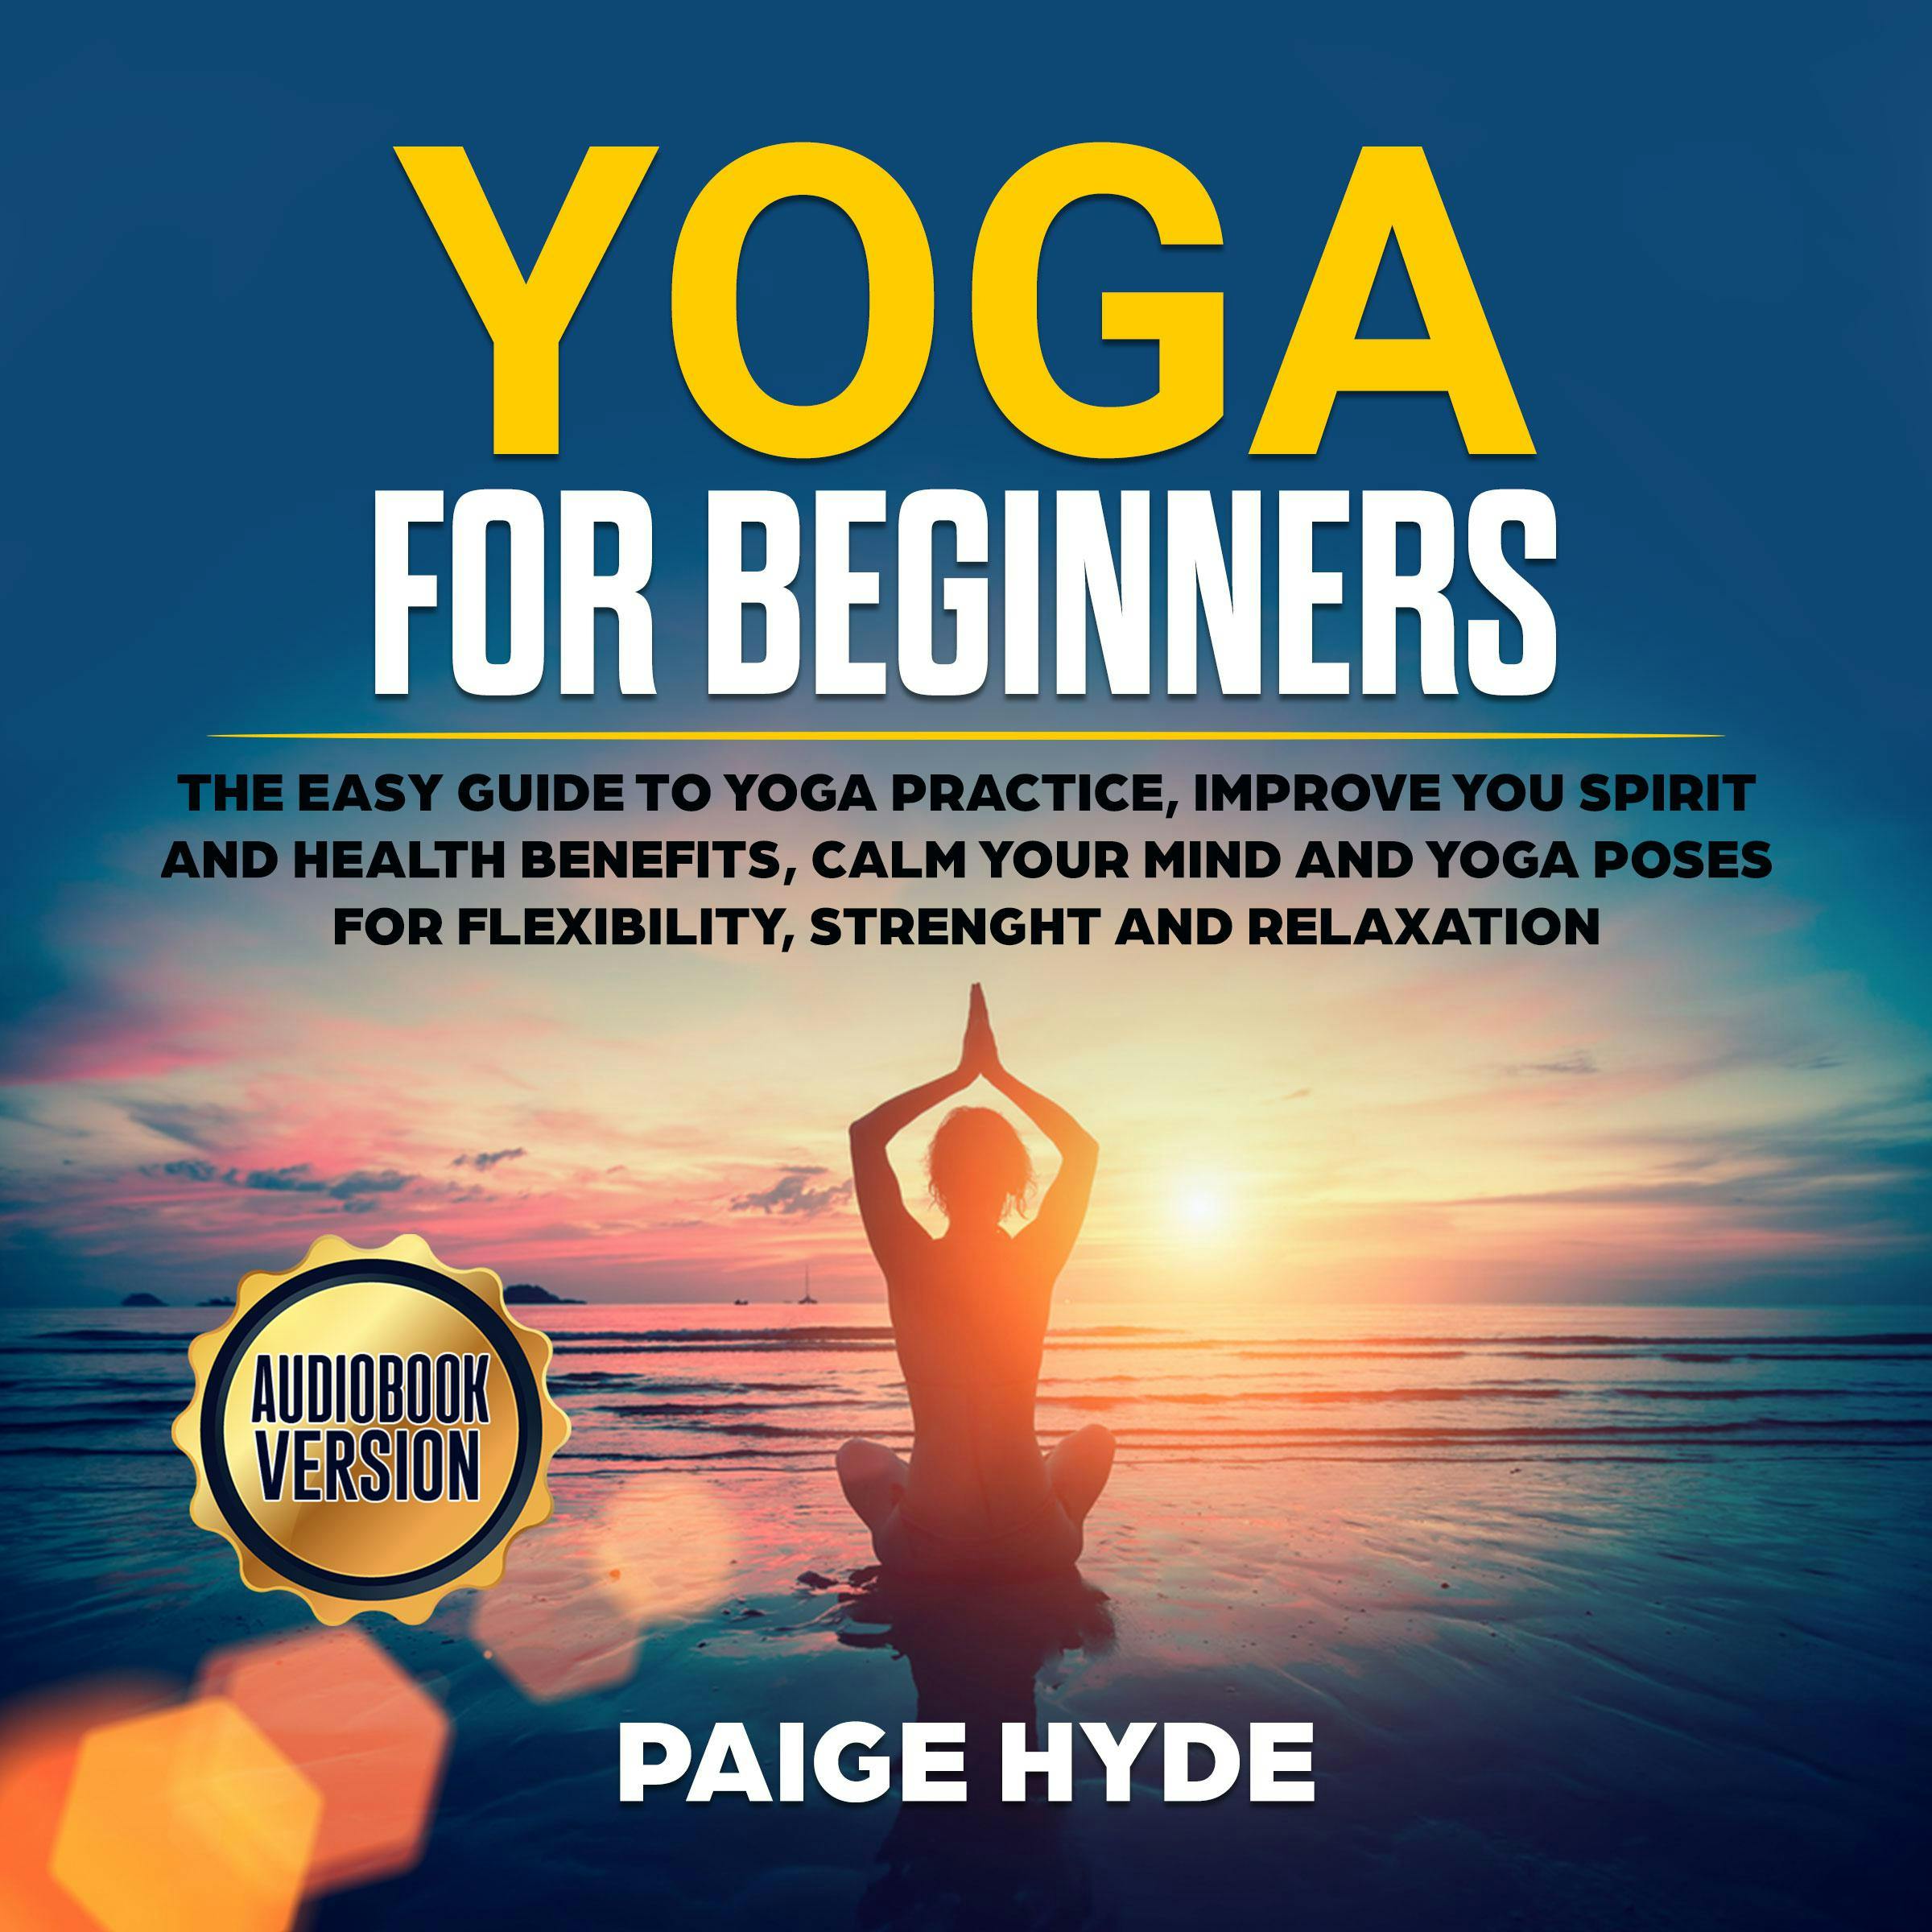 Beginning Yoga: Tips, Health Benefits, and Easy Poses